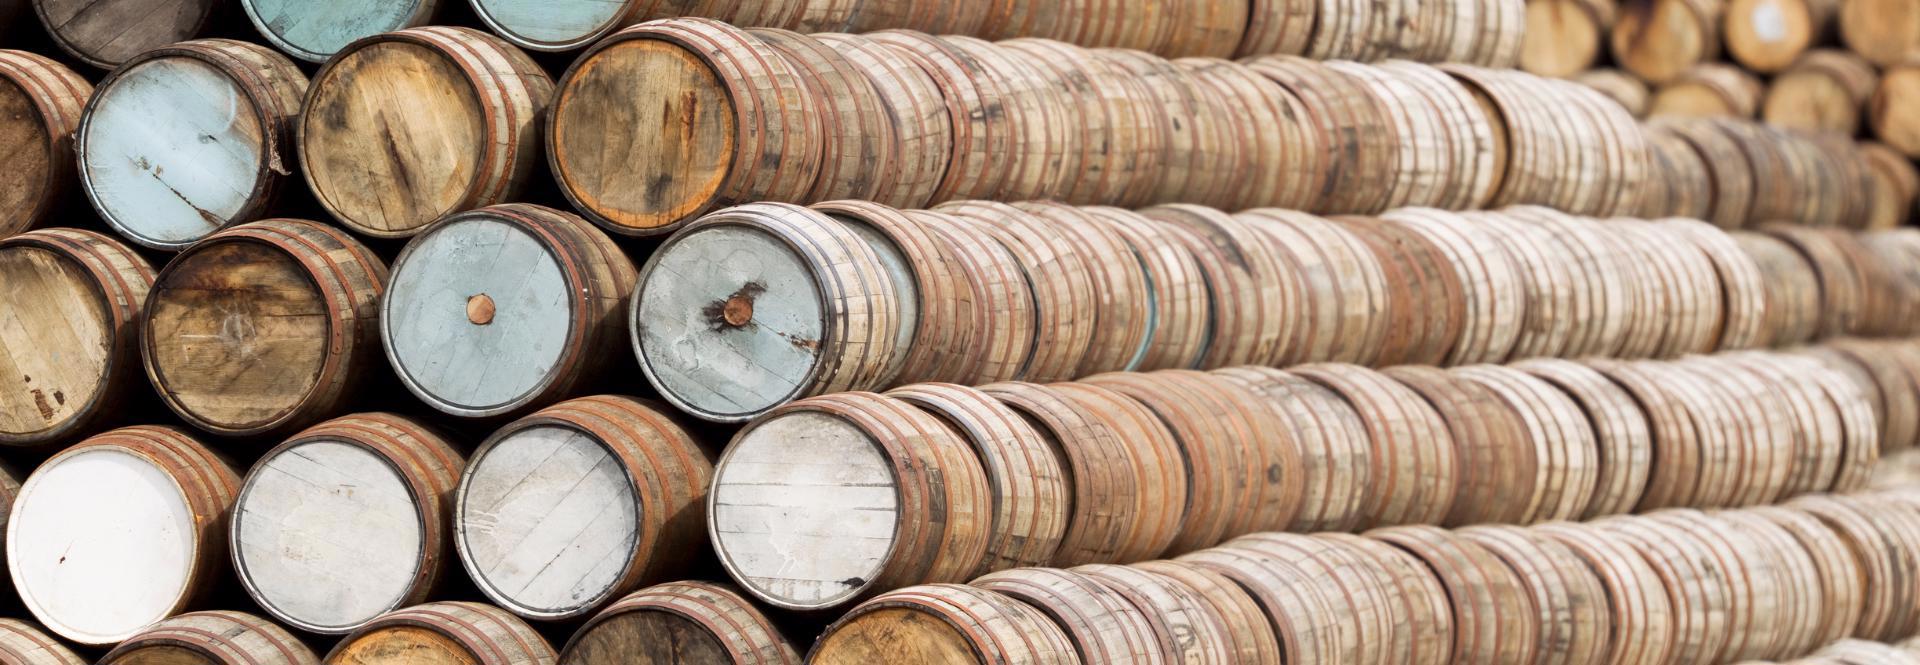 Whisky Cask Business Investment - Cask Trade